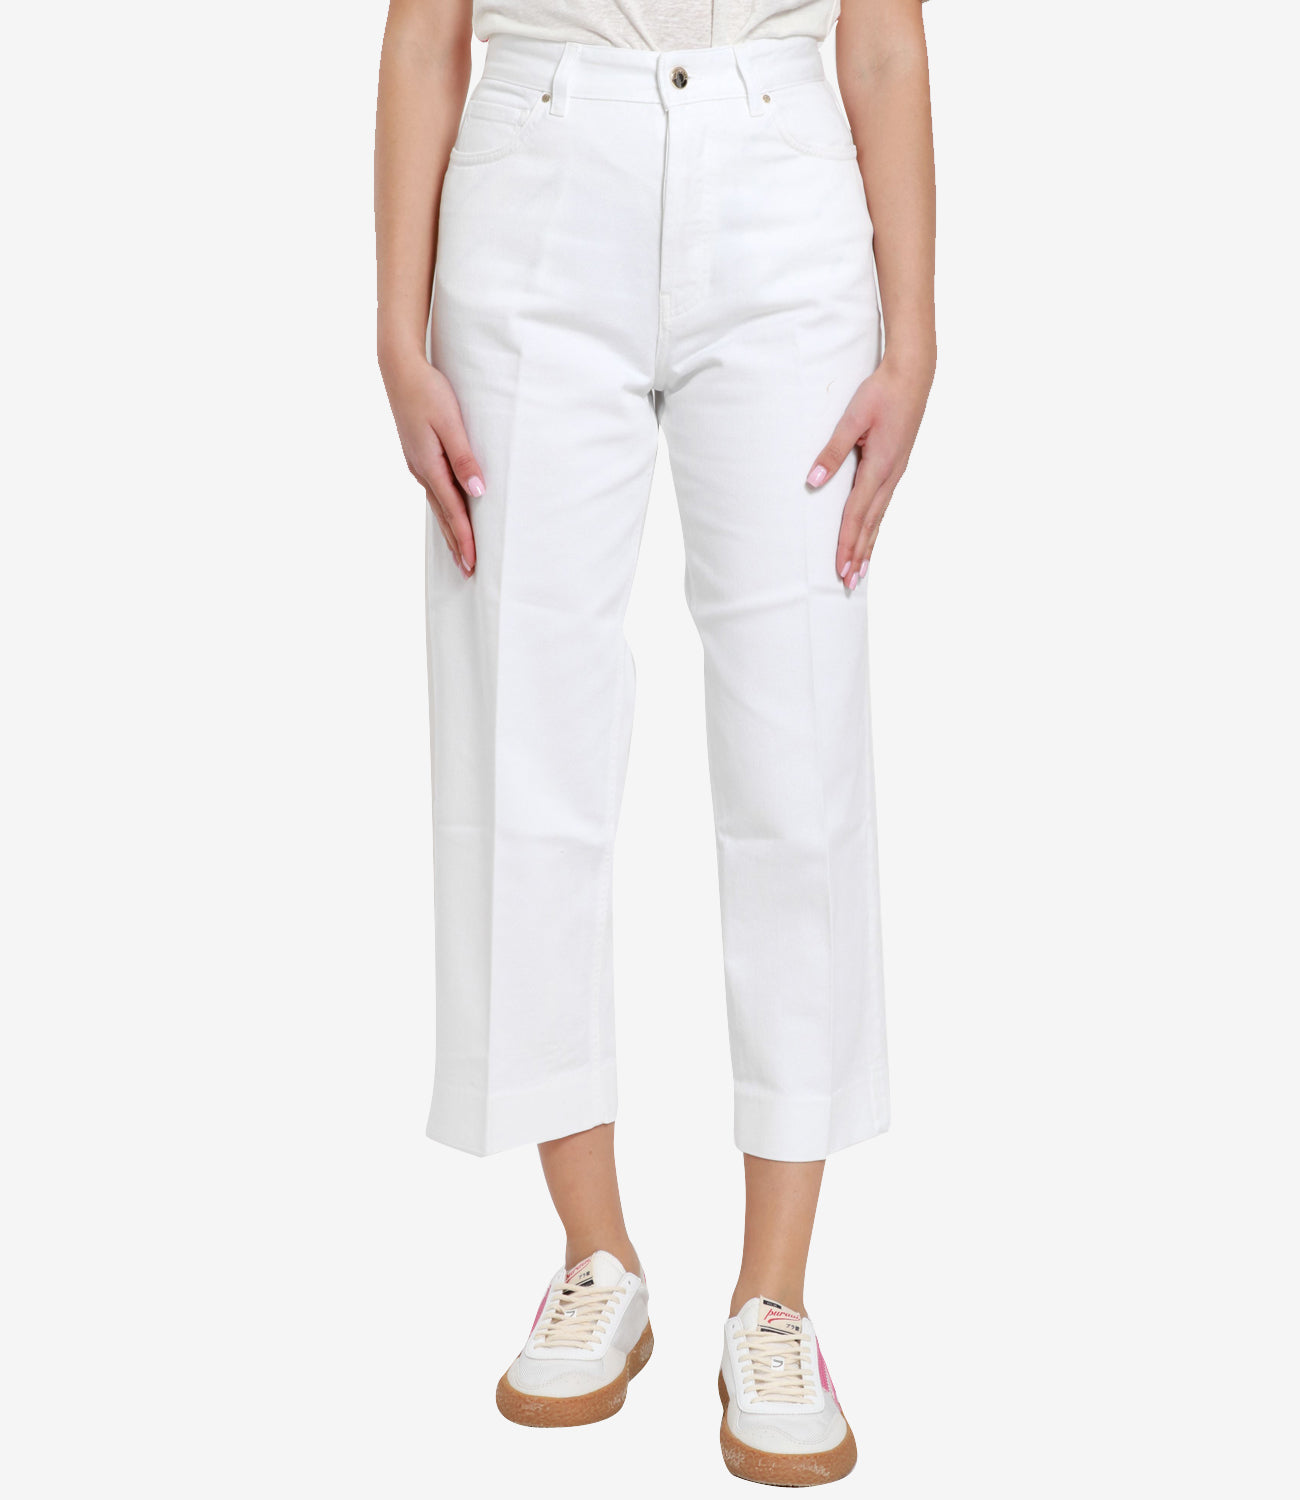 Don the Fuller | Jeans Stoccarda Bianco